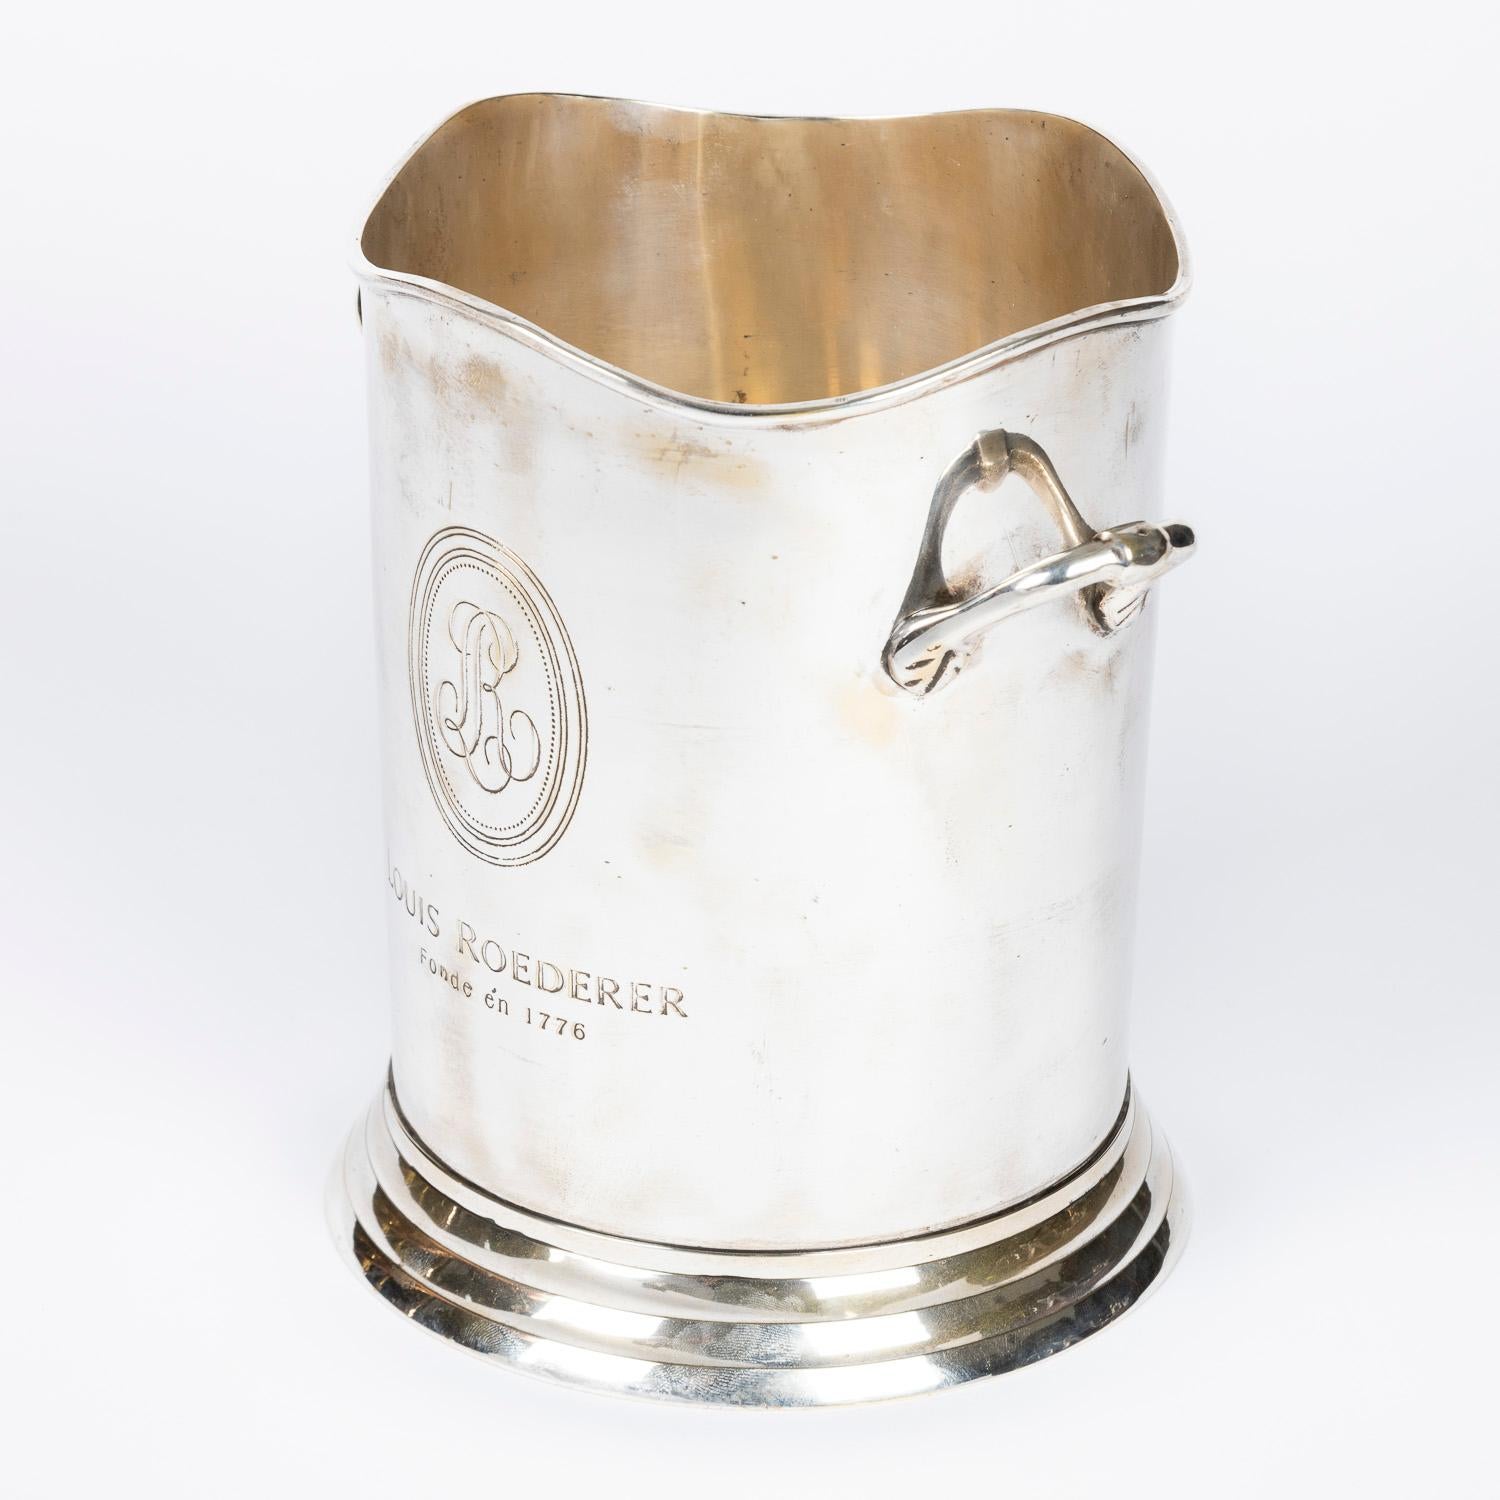 A silver plated champagne ice bucket for Louis Roederer by James Deakin & Sons of Sheffield.

Marked: LOUIS ROEDERER Fonde én 1776.

With the mark of James Deakin & Sons of Sheffield to the underside of the base.

Bottle not included, used in